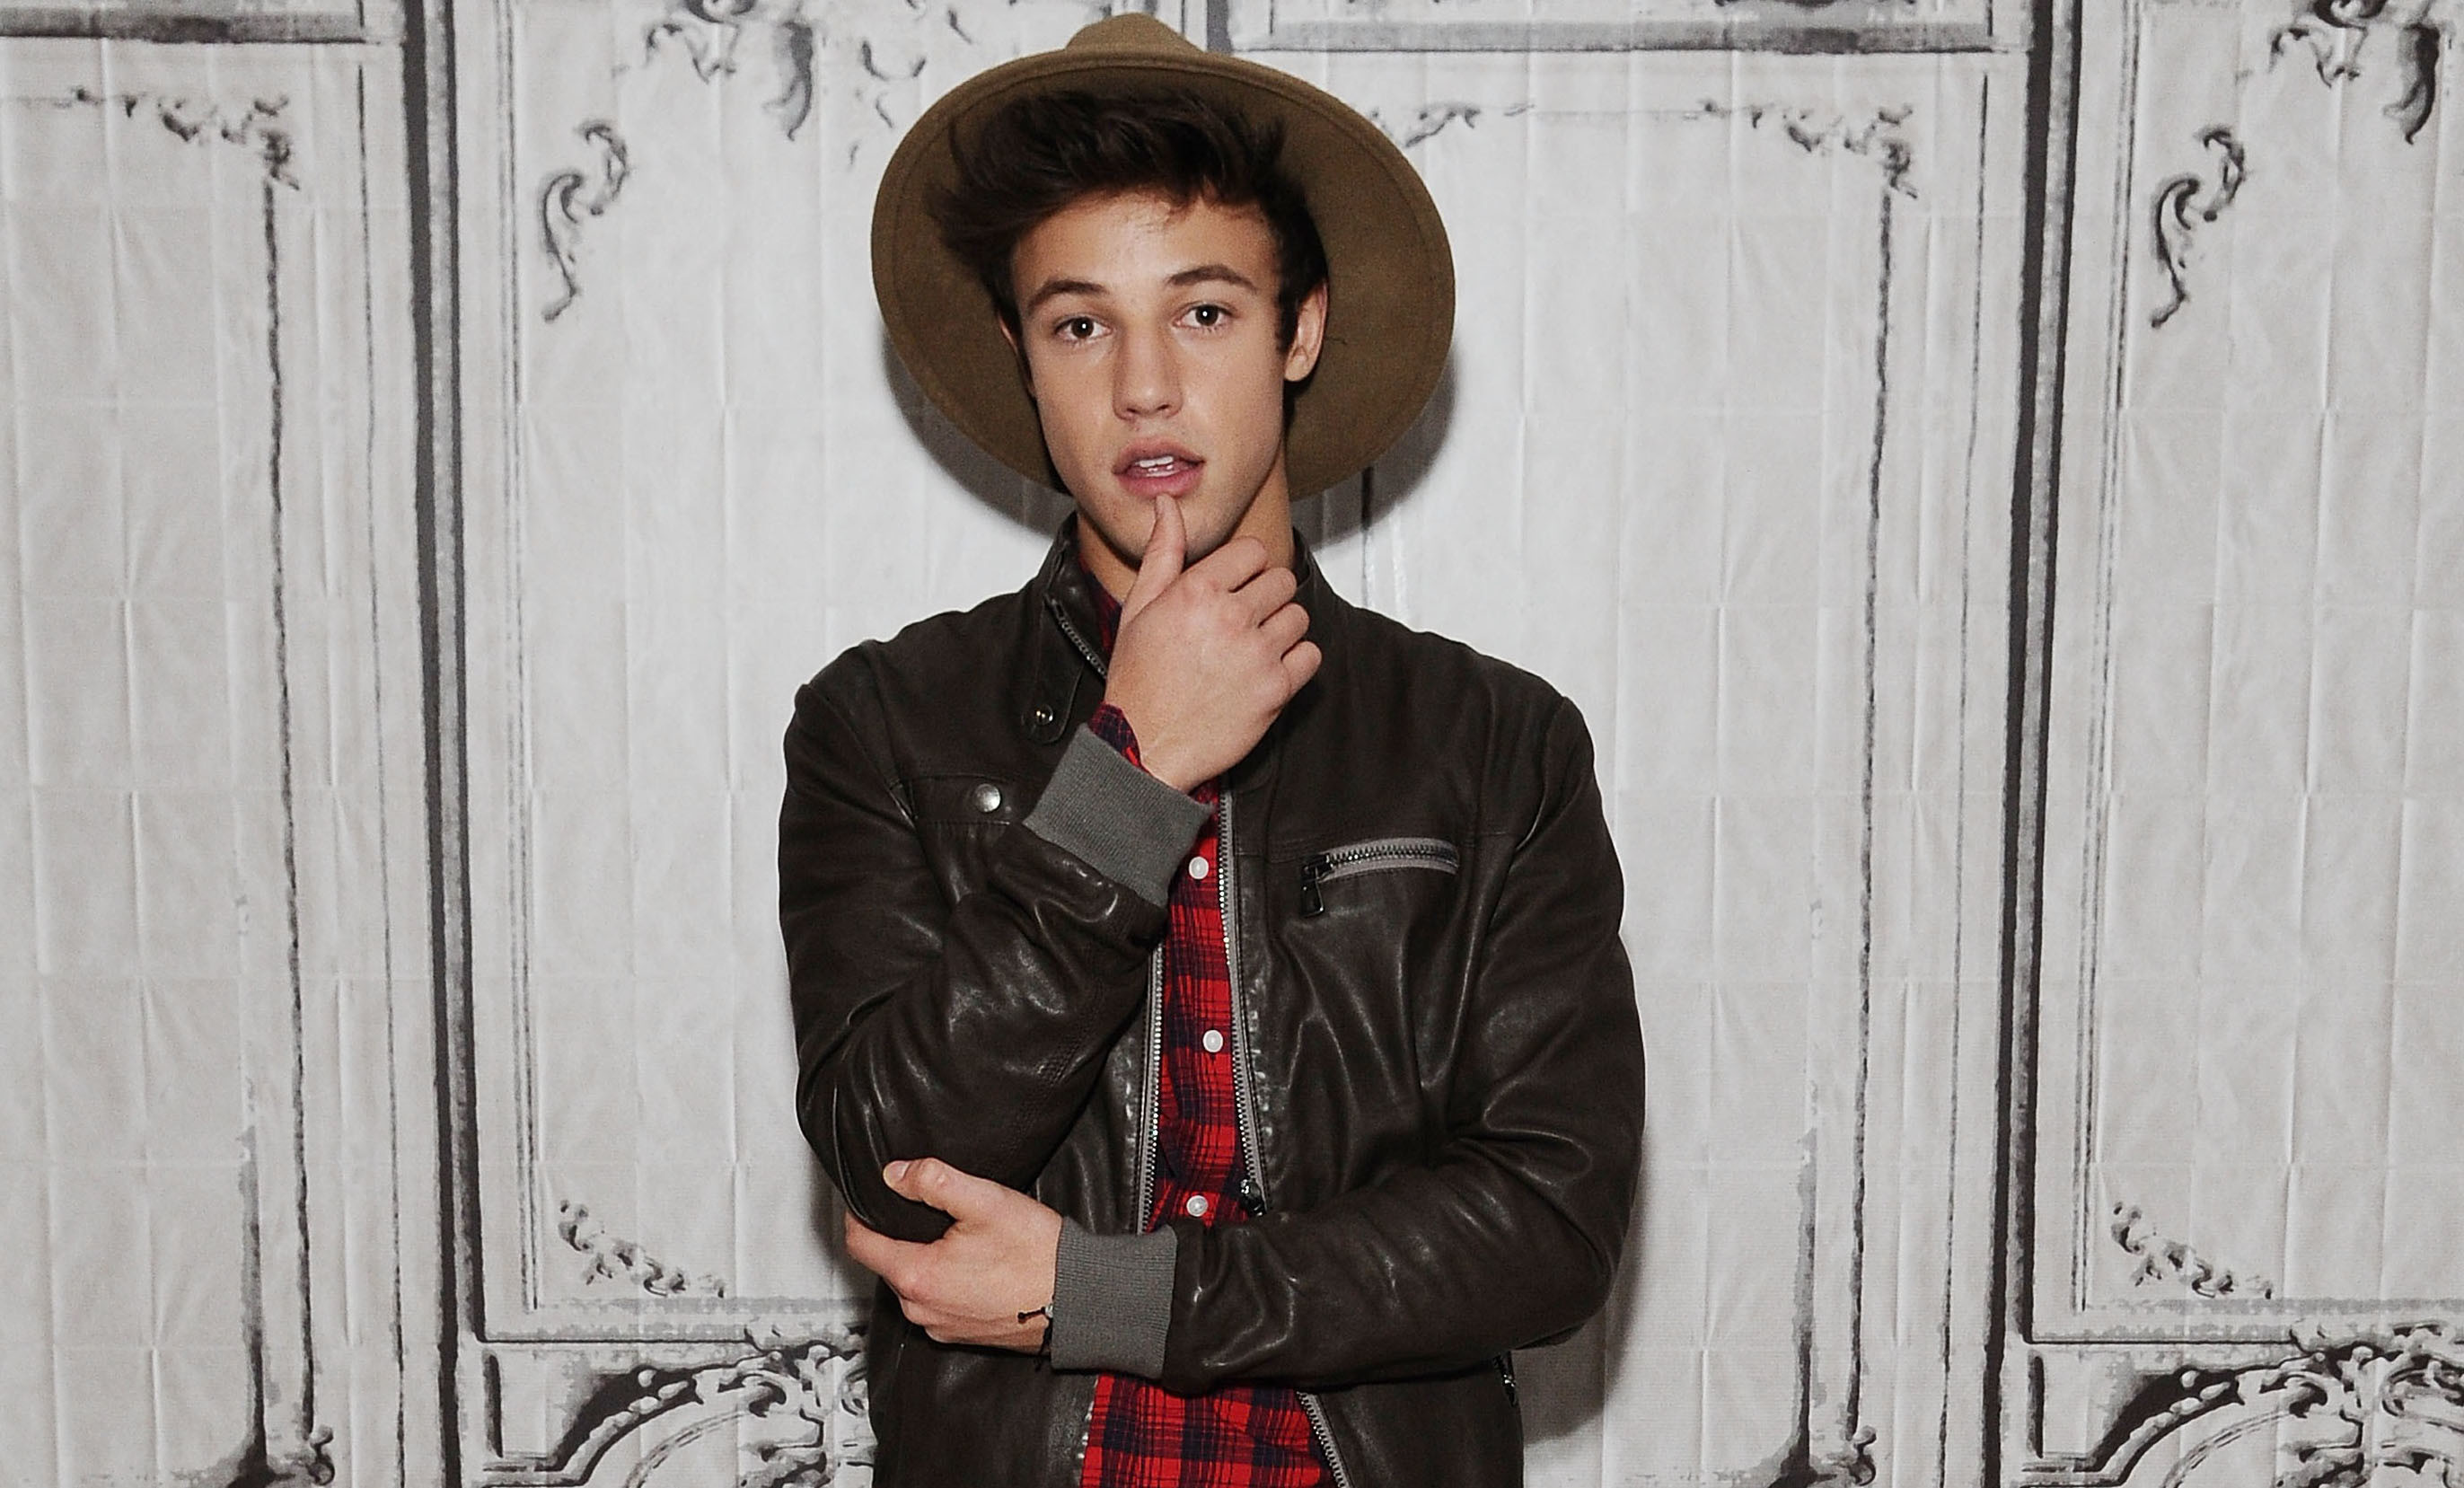 41 Images About Cameron Dalles On We Heart It See More About Cameron Dallas Wallpapers 2744x1657